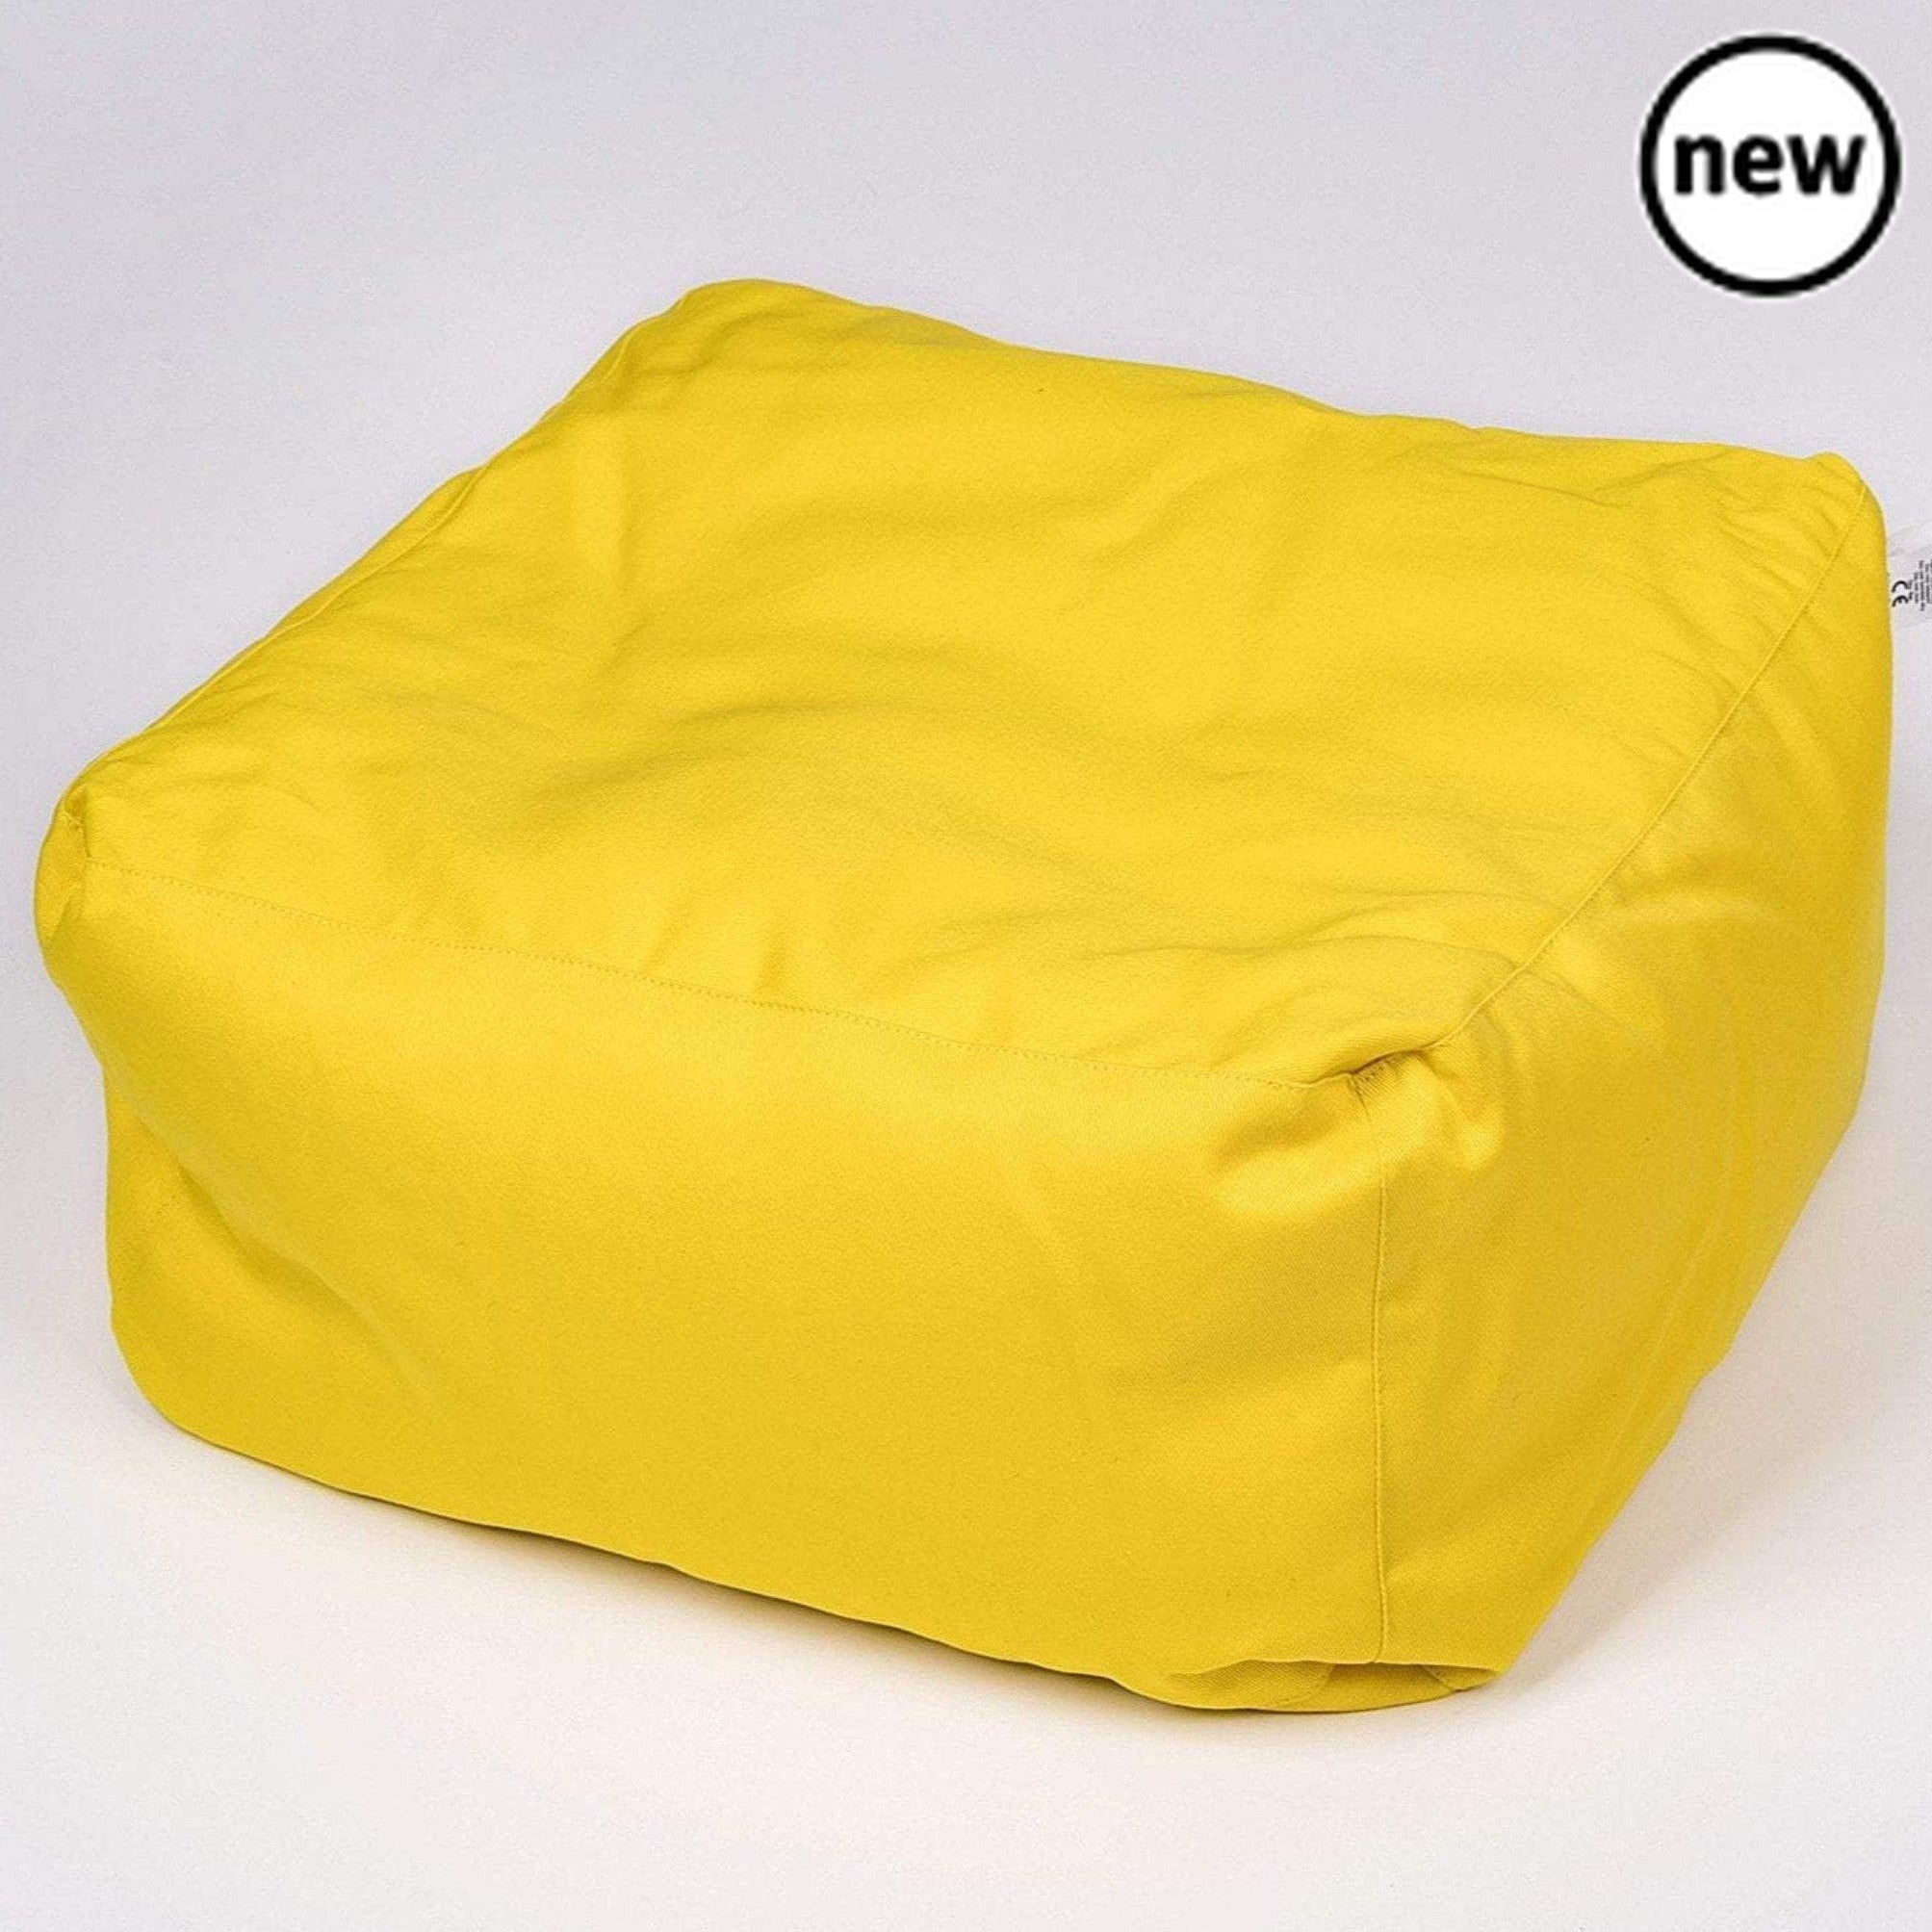 Cotton Square Poufs Set Of 12, Introducing our set of Cotton Square Poufs – a versatile and vibrant addition to any space. This set includes 12 pouffes, featuring two in each color or as per your specific request, providing endless possibilities for creative and functional use. Specifications: Size: 40x40x20cm Fabric: 100% Cotton Filling: Polystyrene balls Versatile Usage: The Cotton Square Poufs offer a multitude of uses, from comfortable floor pillows to footpaths, creative building blocks, and even engag